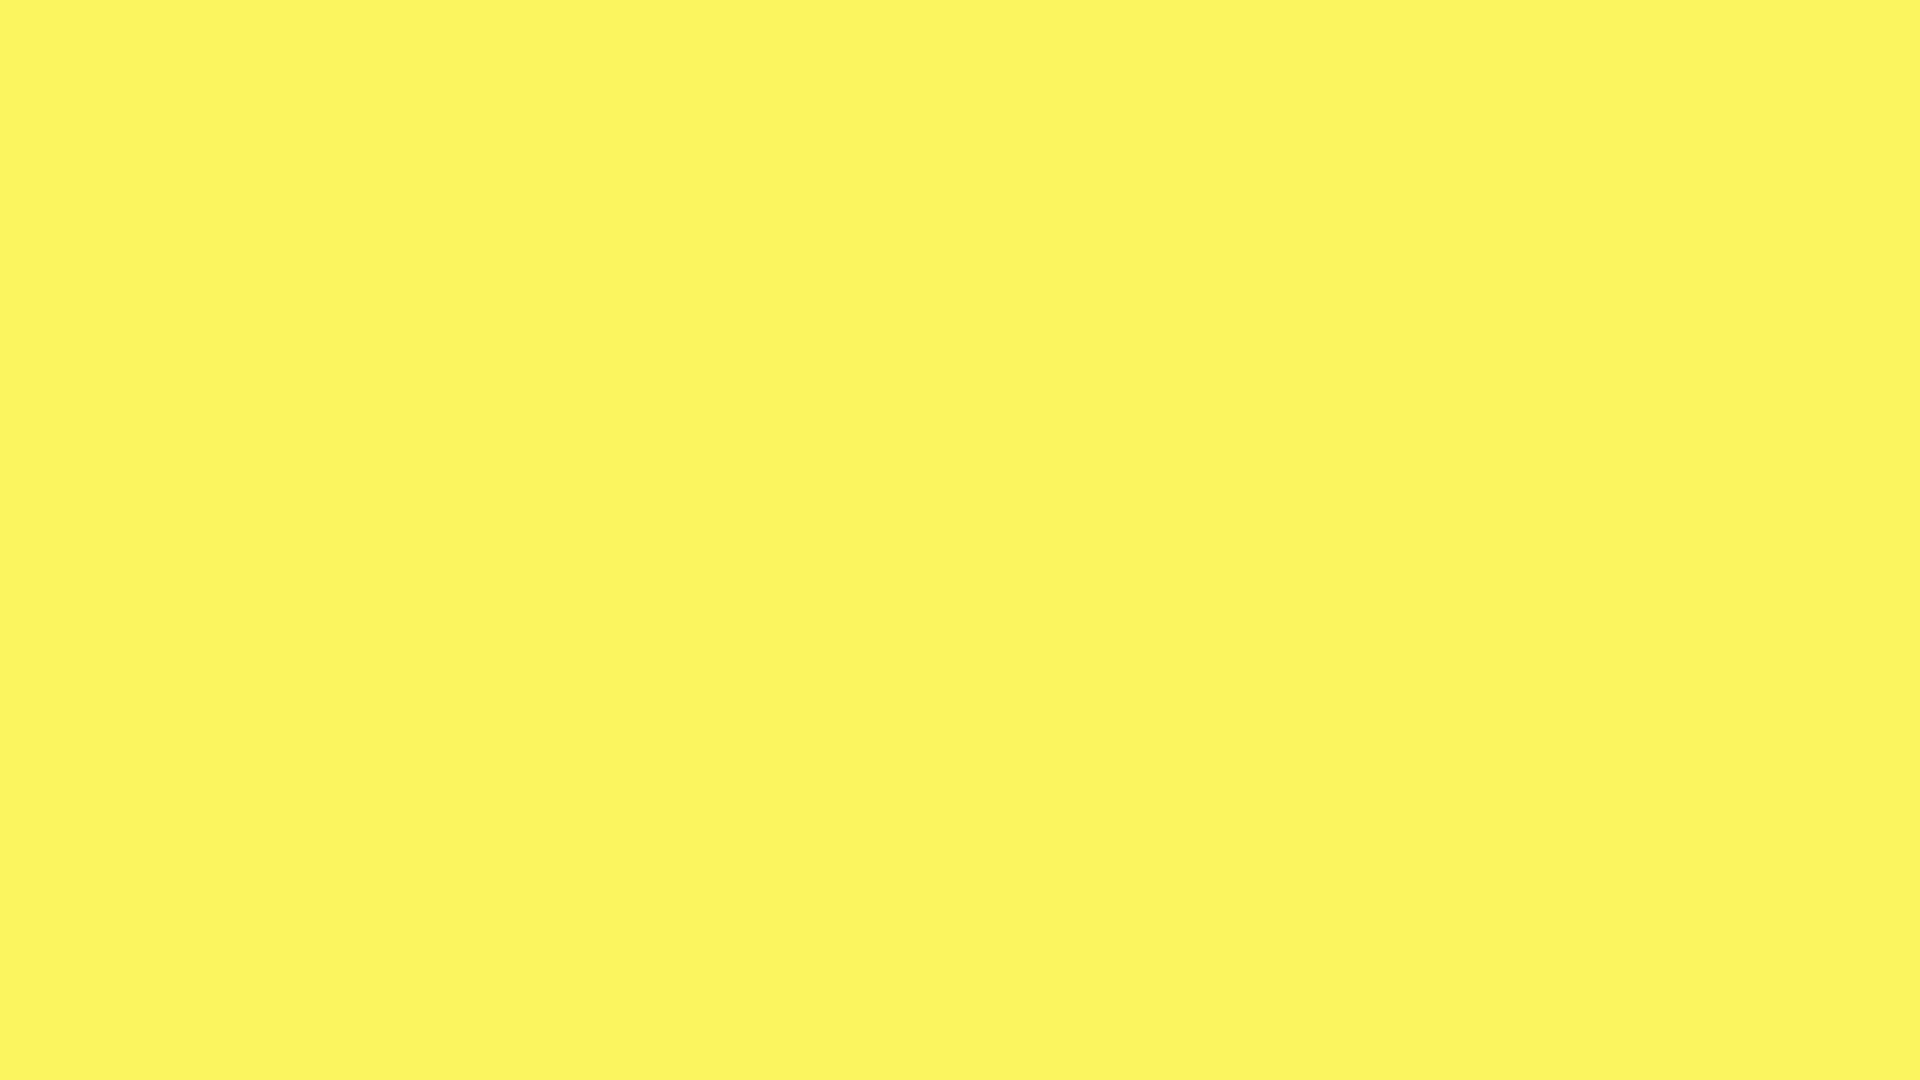 Brighten Up Your Day With Solid Yellow Wallpaper